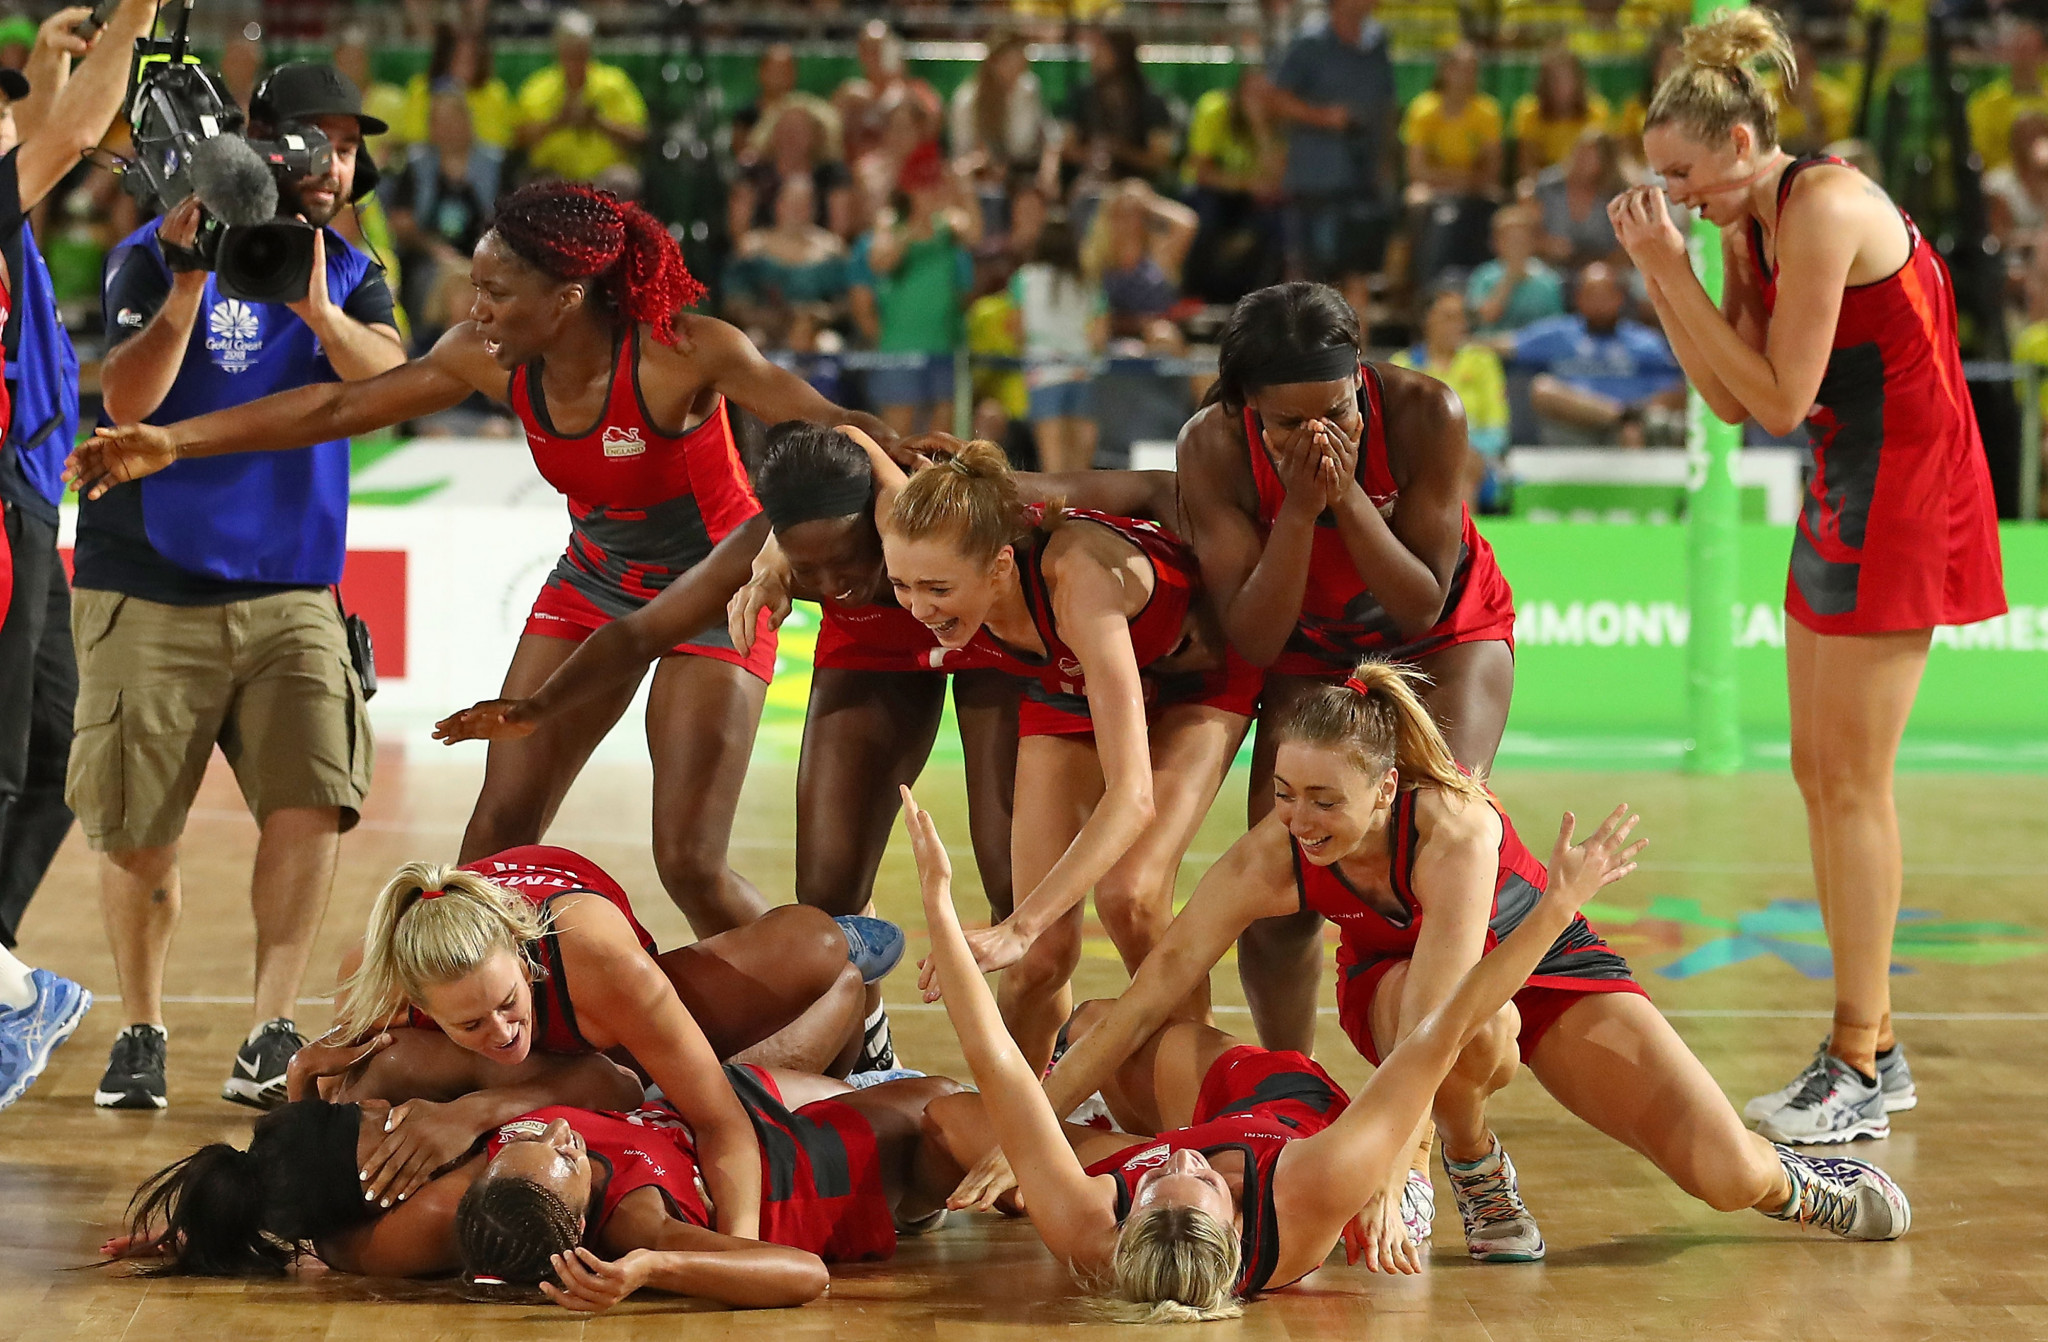 Around 130,700 women took up netball in the wake of England's 2018 Commonwealth Games victory in Gold Coast ©Getty Images